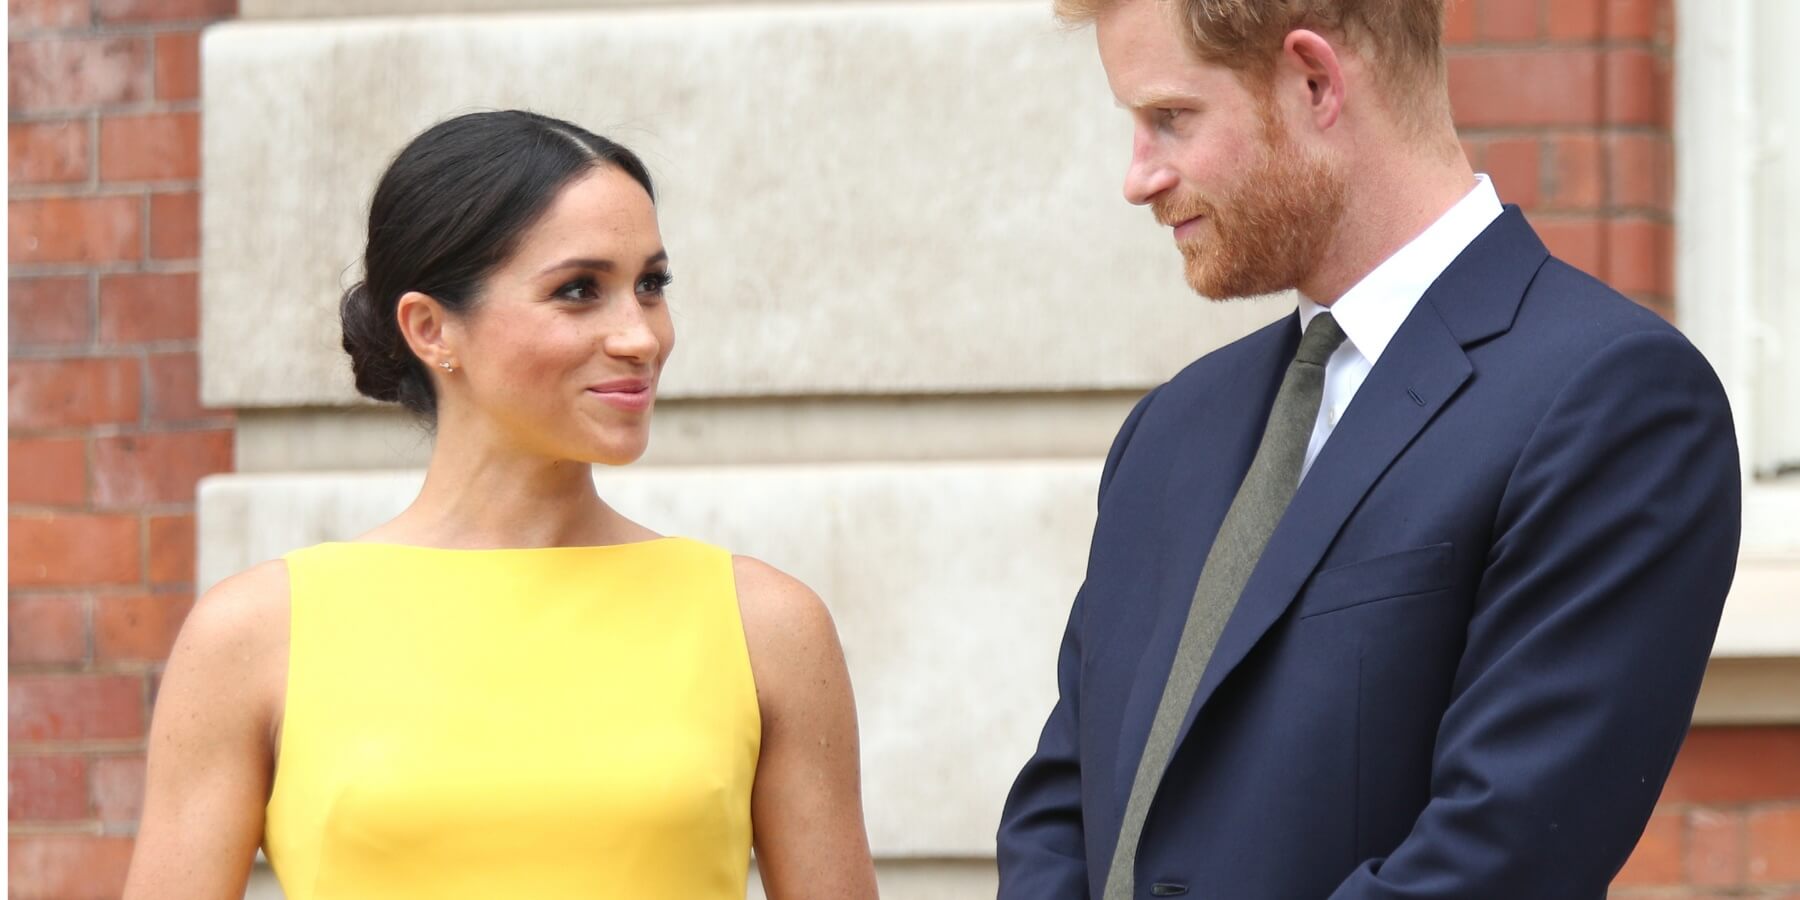 Meghan Markle and Prince Harry photographed together in 2018